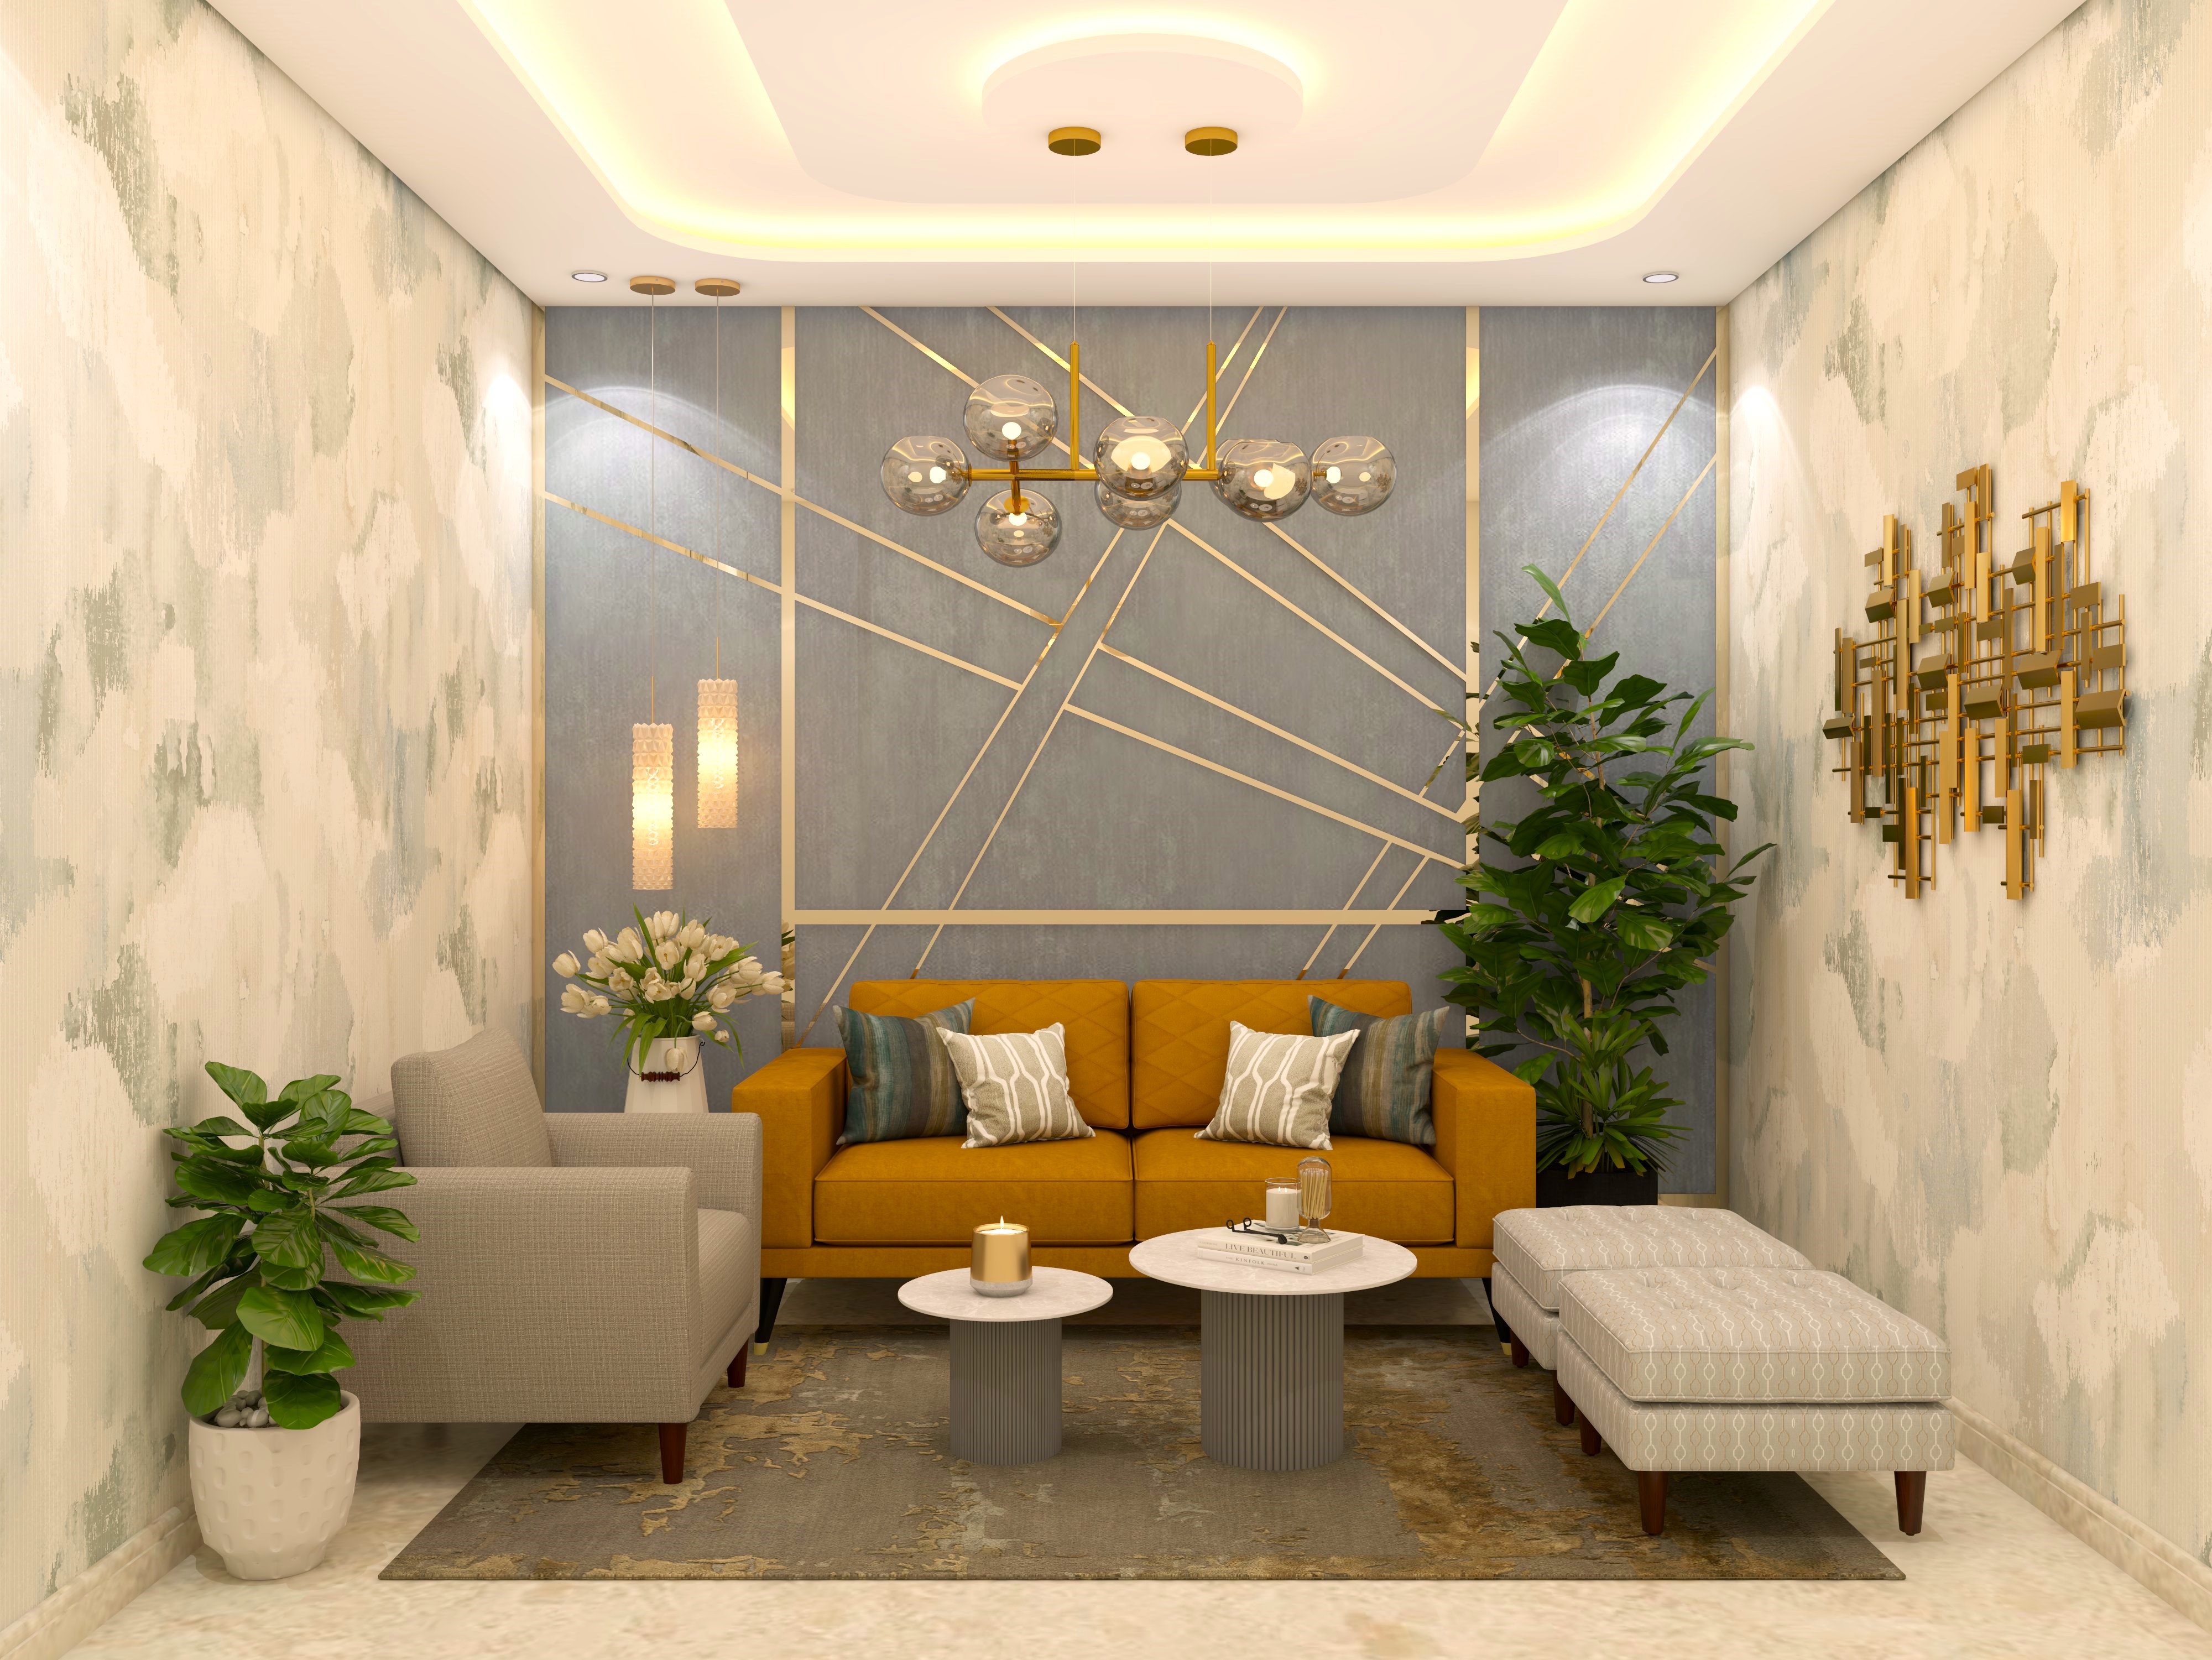 Small living room with orange leather sofa and paneling with golden strips-Beautiful Homes